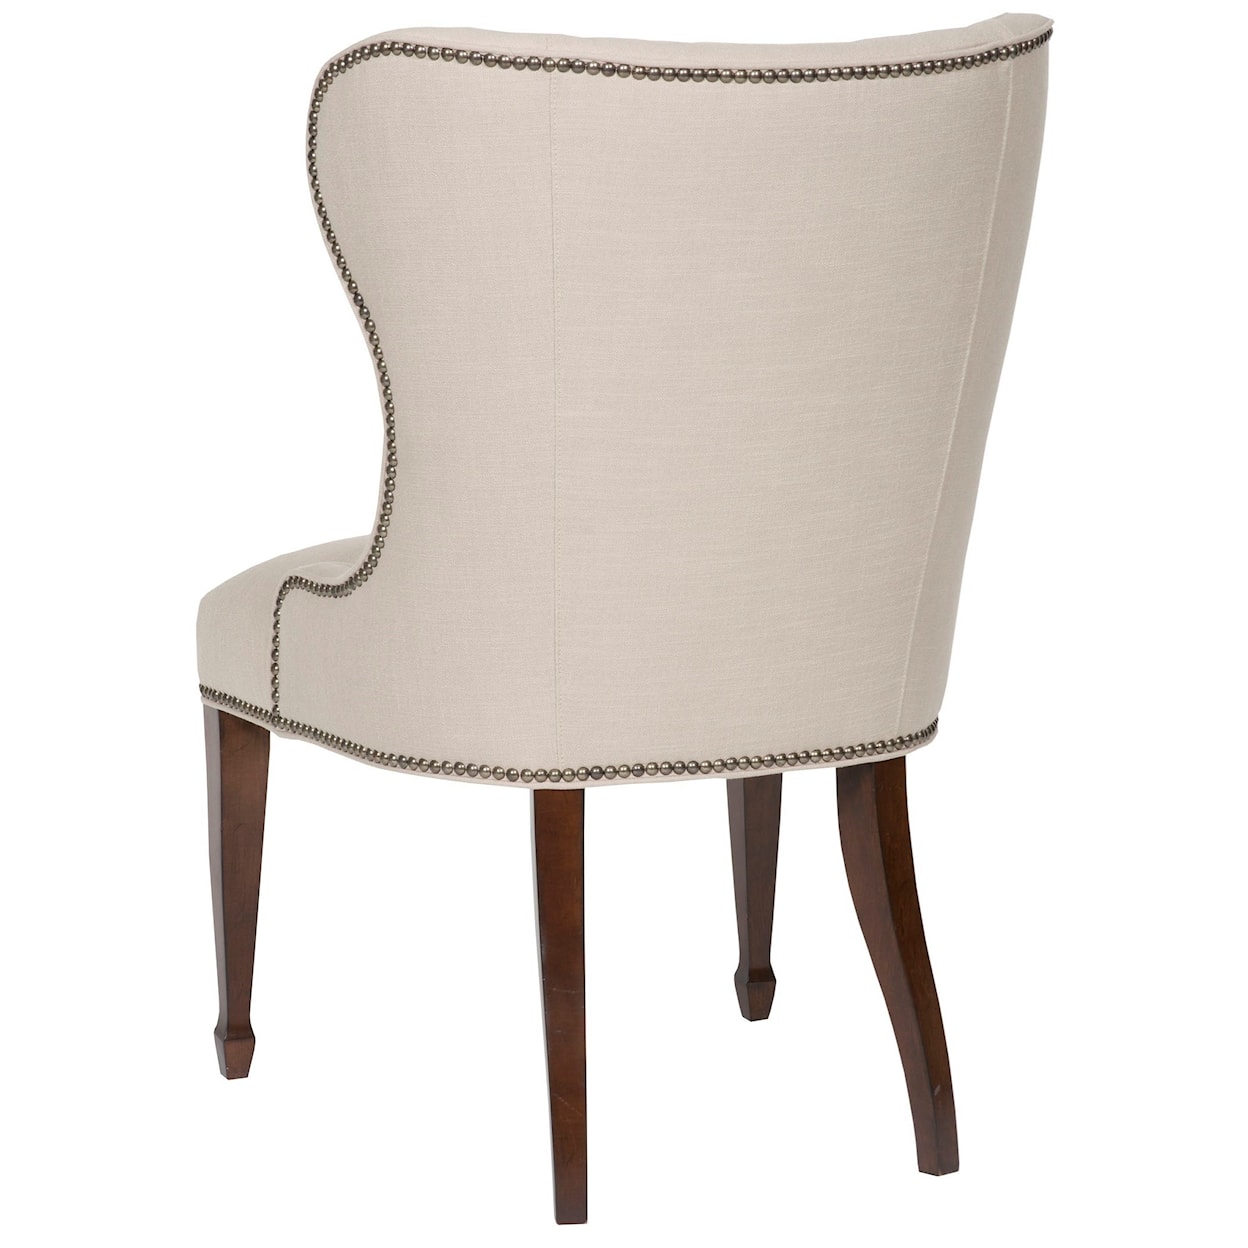 Vanguard Furniture Accent Chairs Ava Side Chair